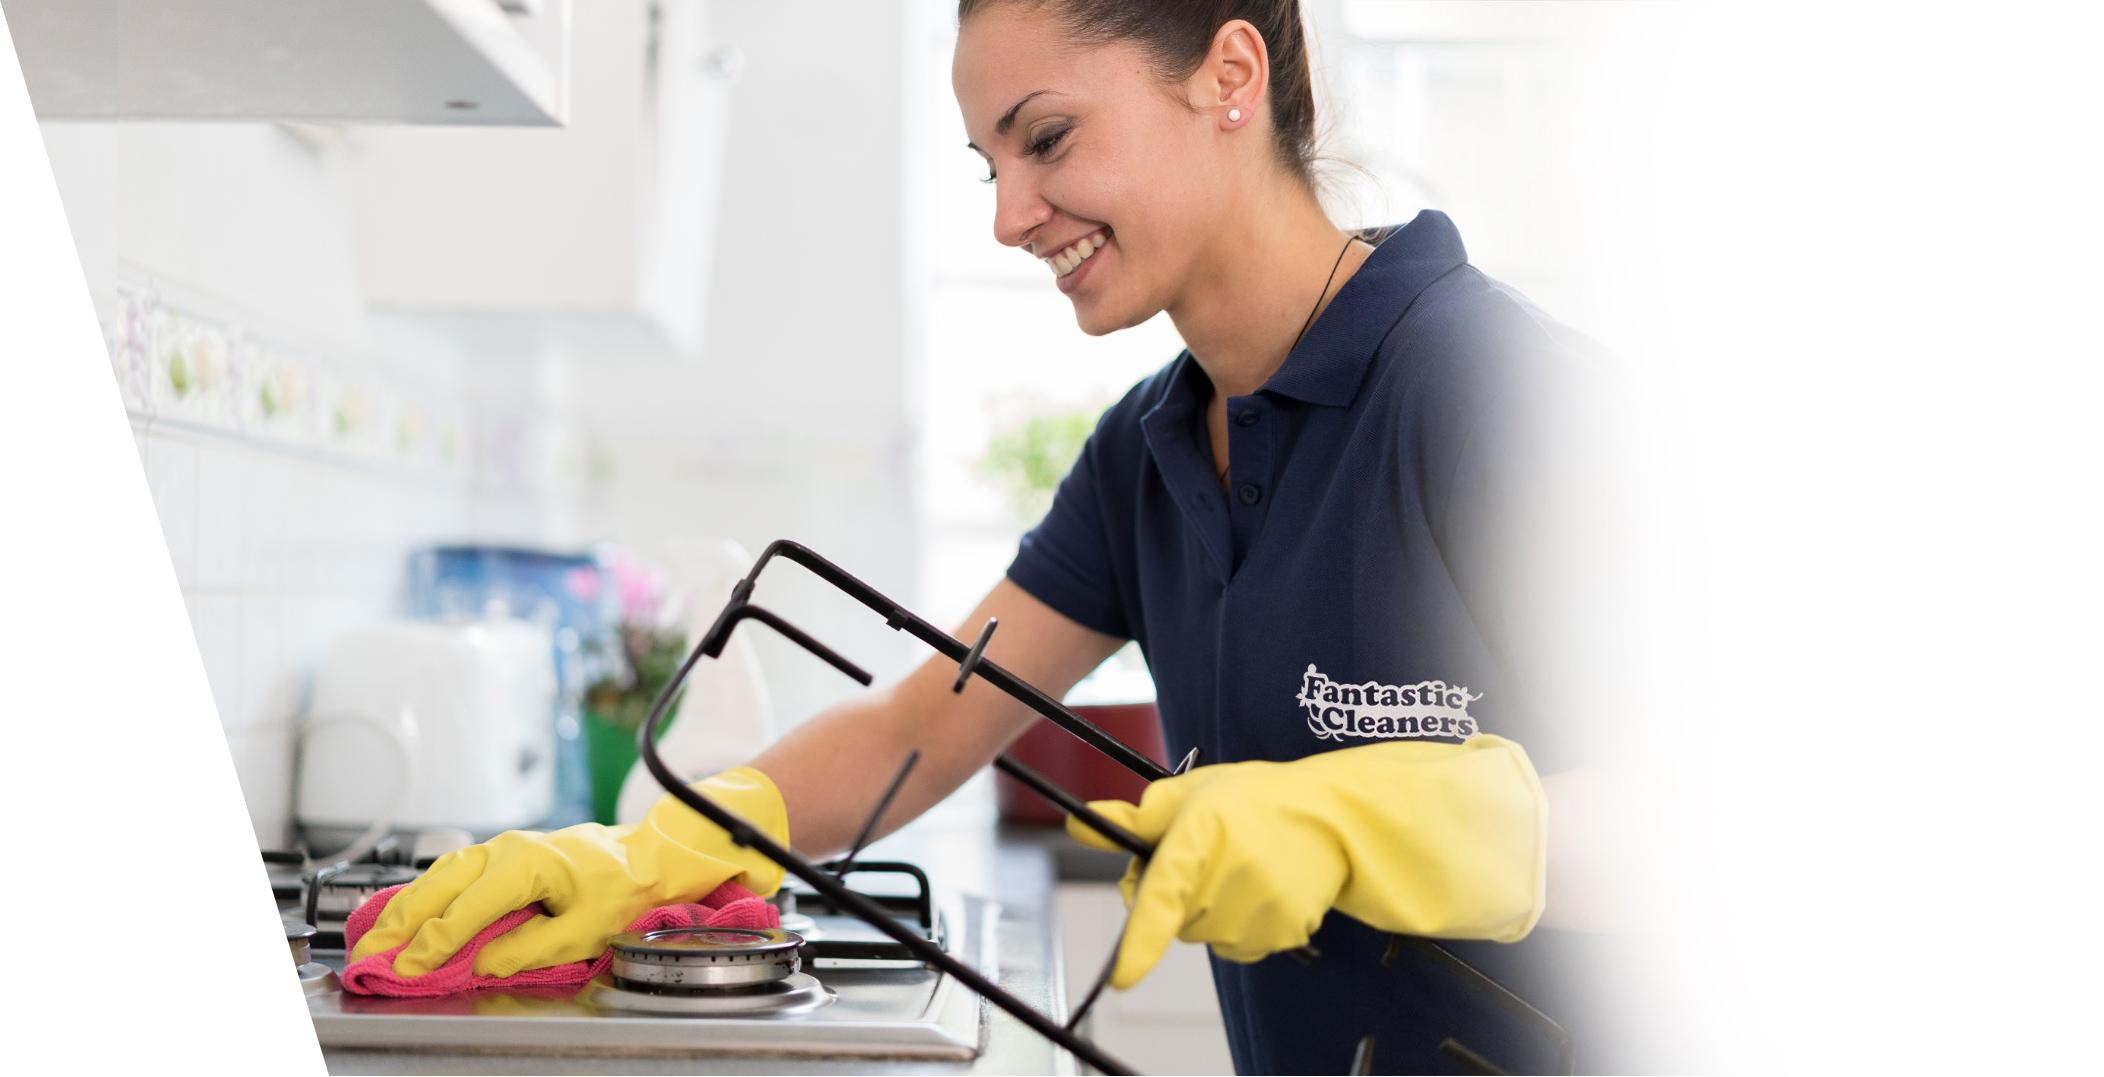 A Fantastic Services professional cleaner who is wearing a dark blue uniform and yellow latex gloves. She is in a domestic kitchen, using a cloth to wipe a stove. The surfaces and the floor of the kitchen appear spotless and shiny.